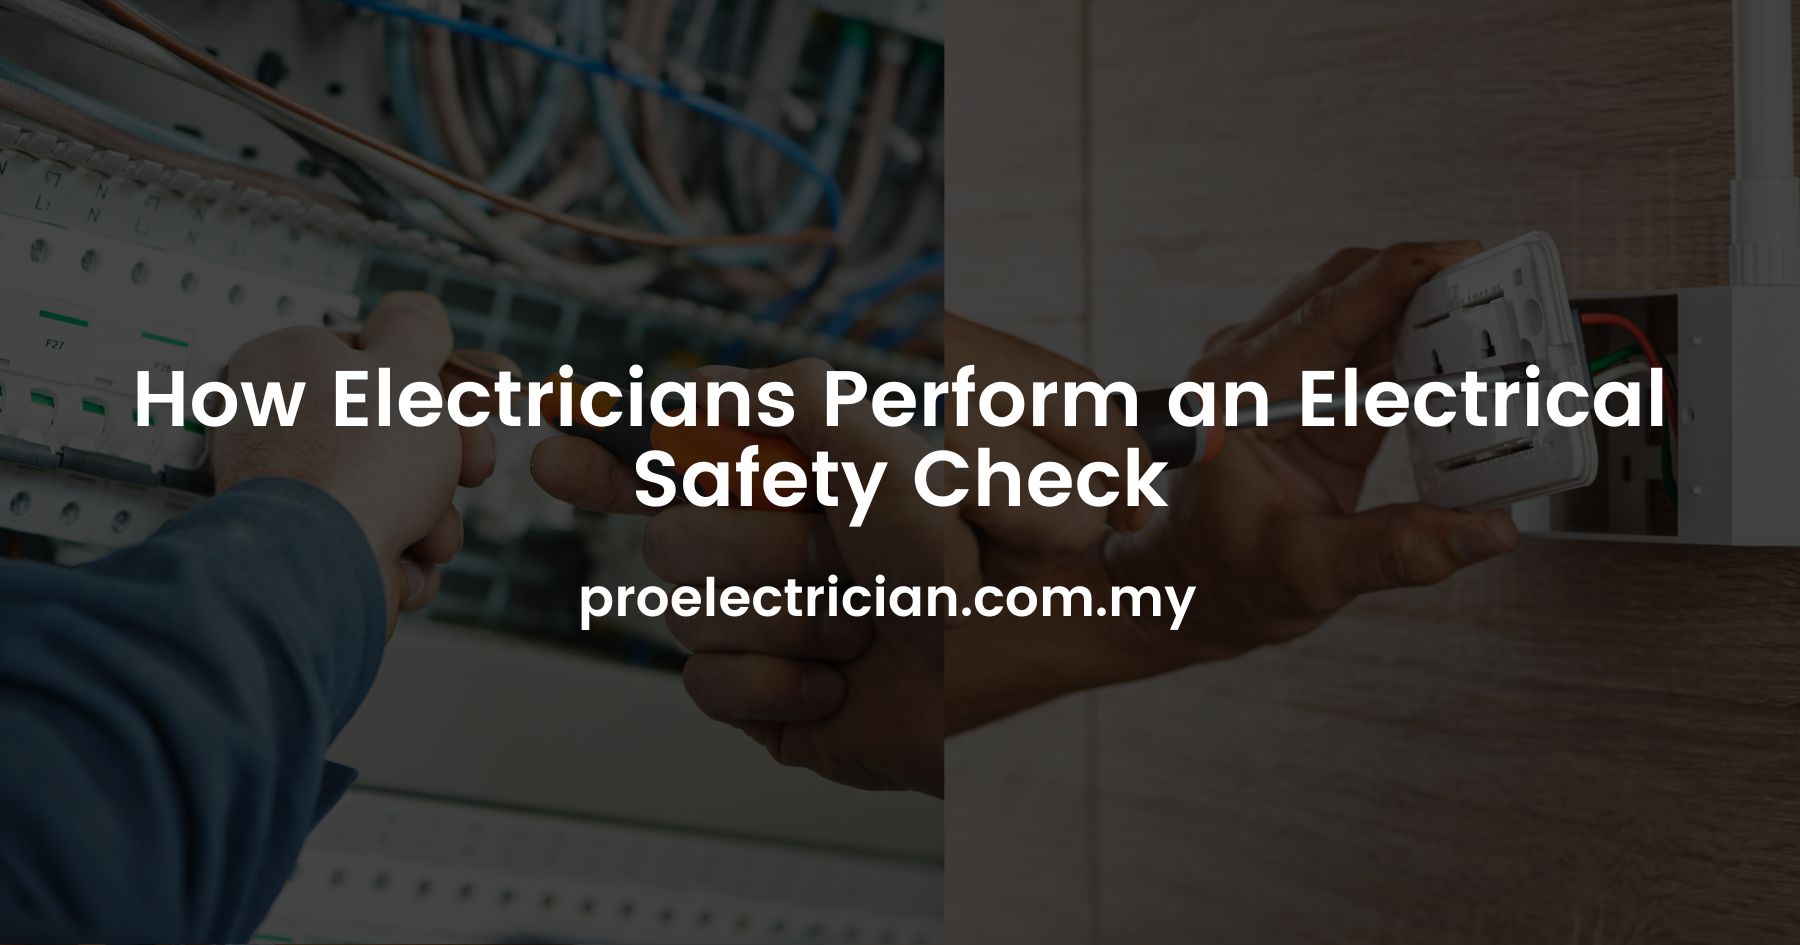 How Electricians Perform an Electrical Safety Check